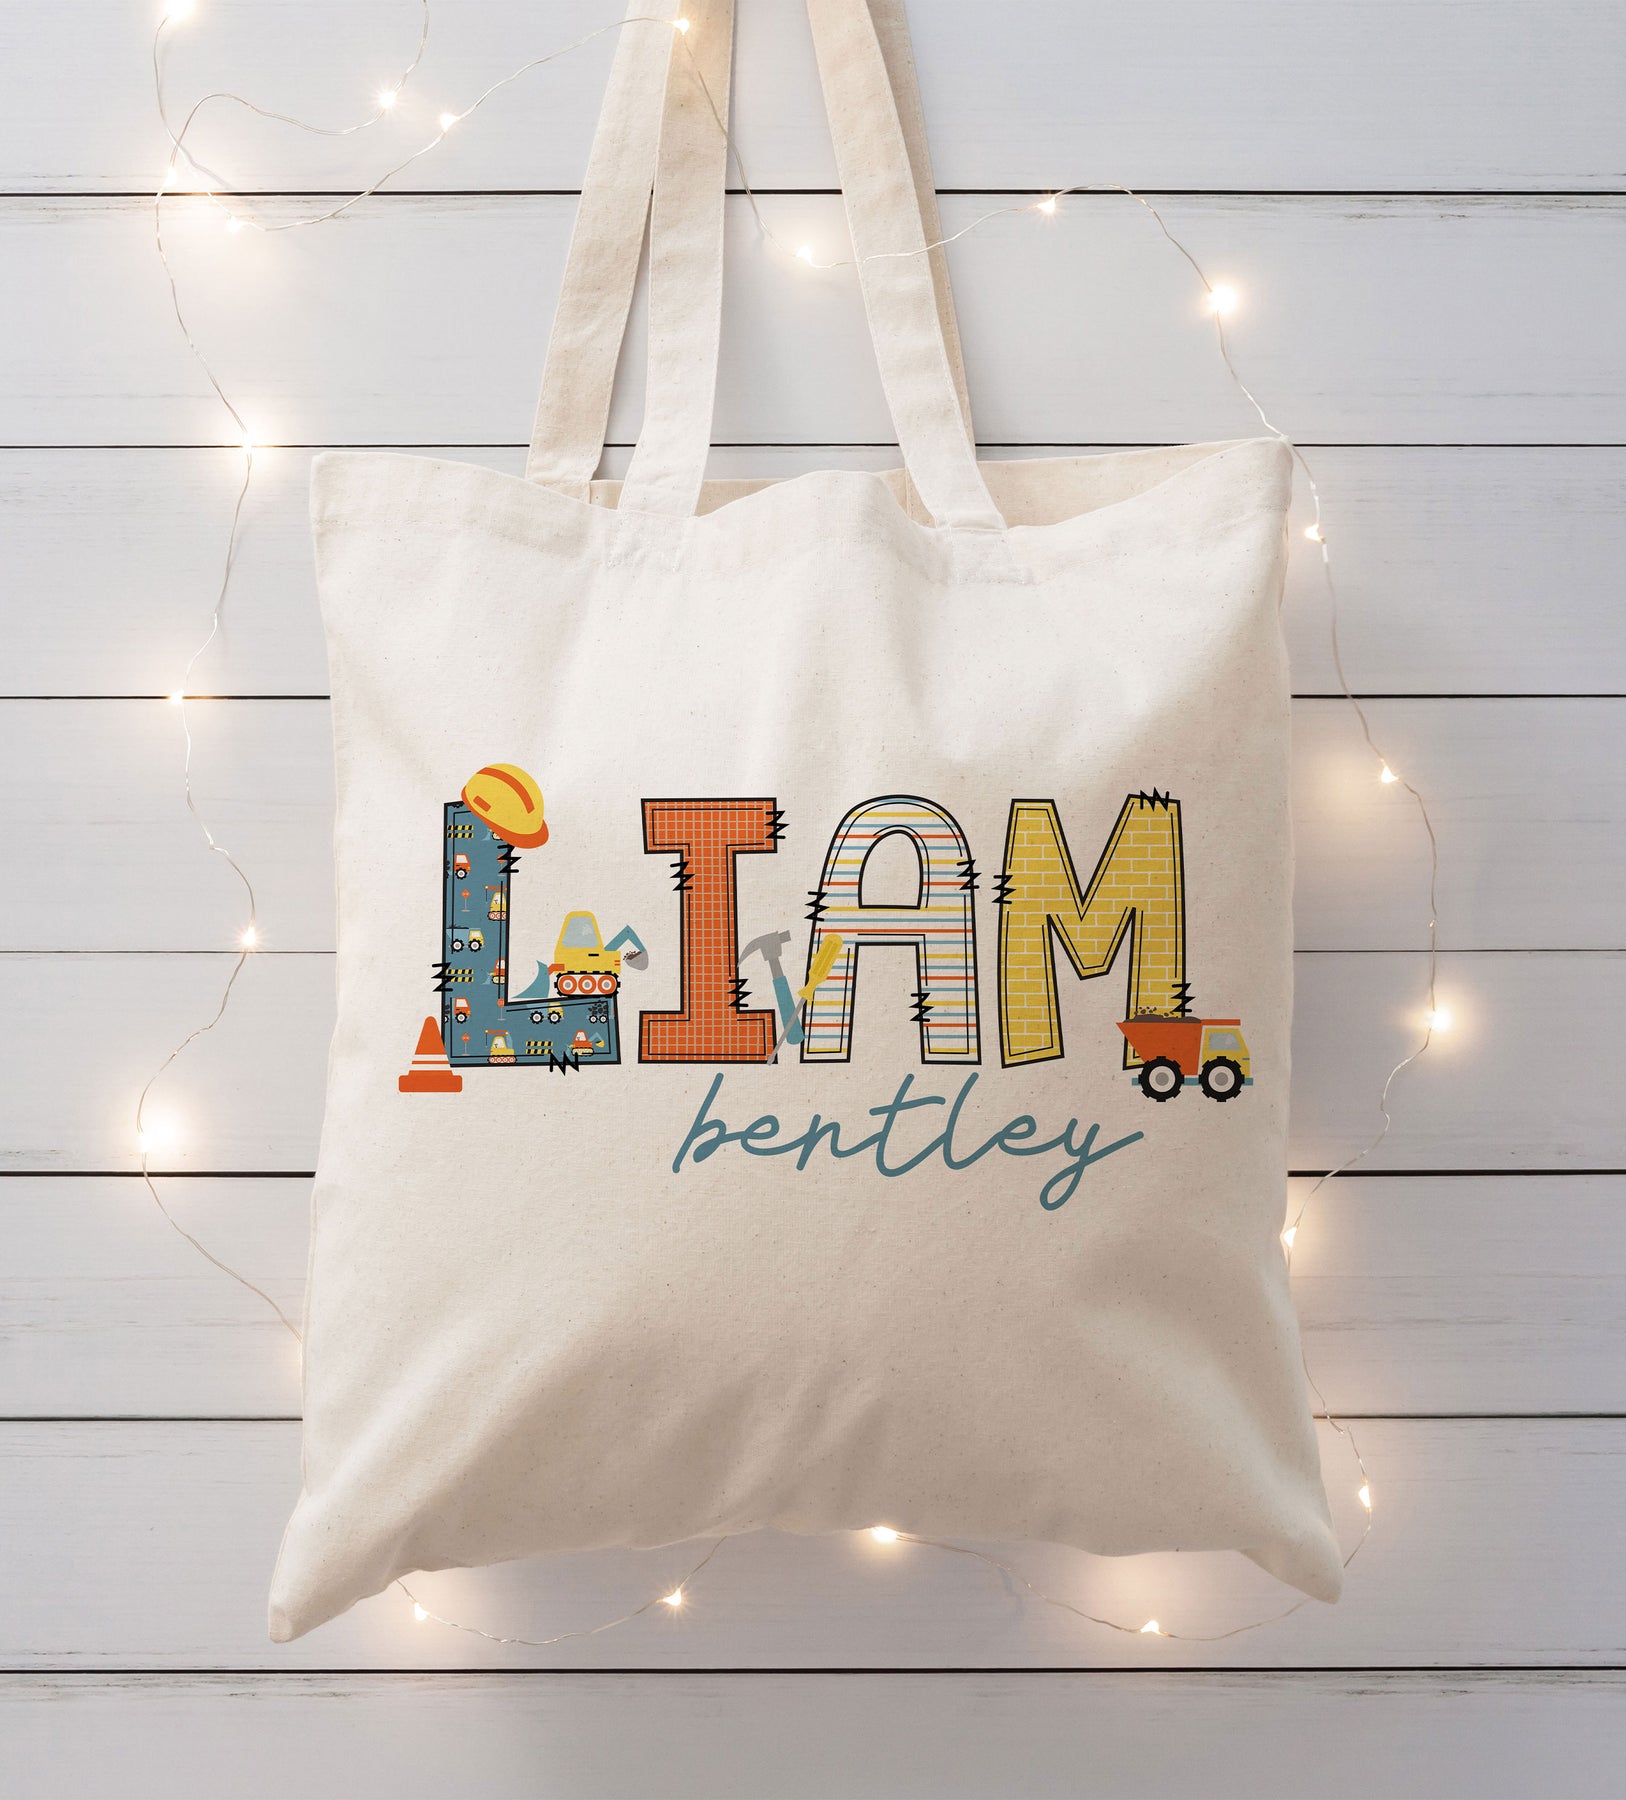  Personalized Canvas Tote Bags for Women w/Name & Text